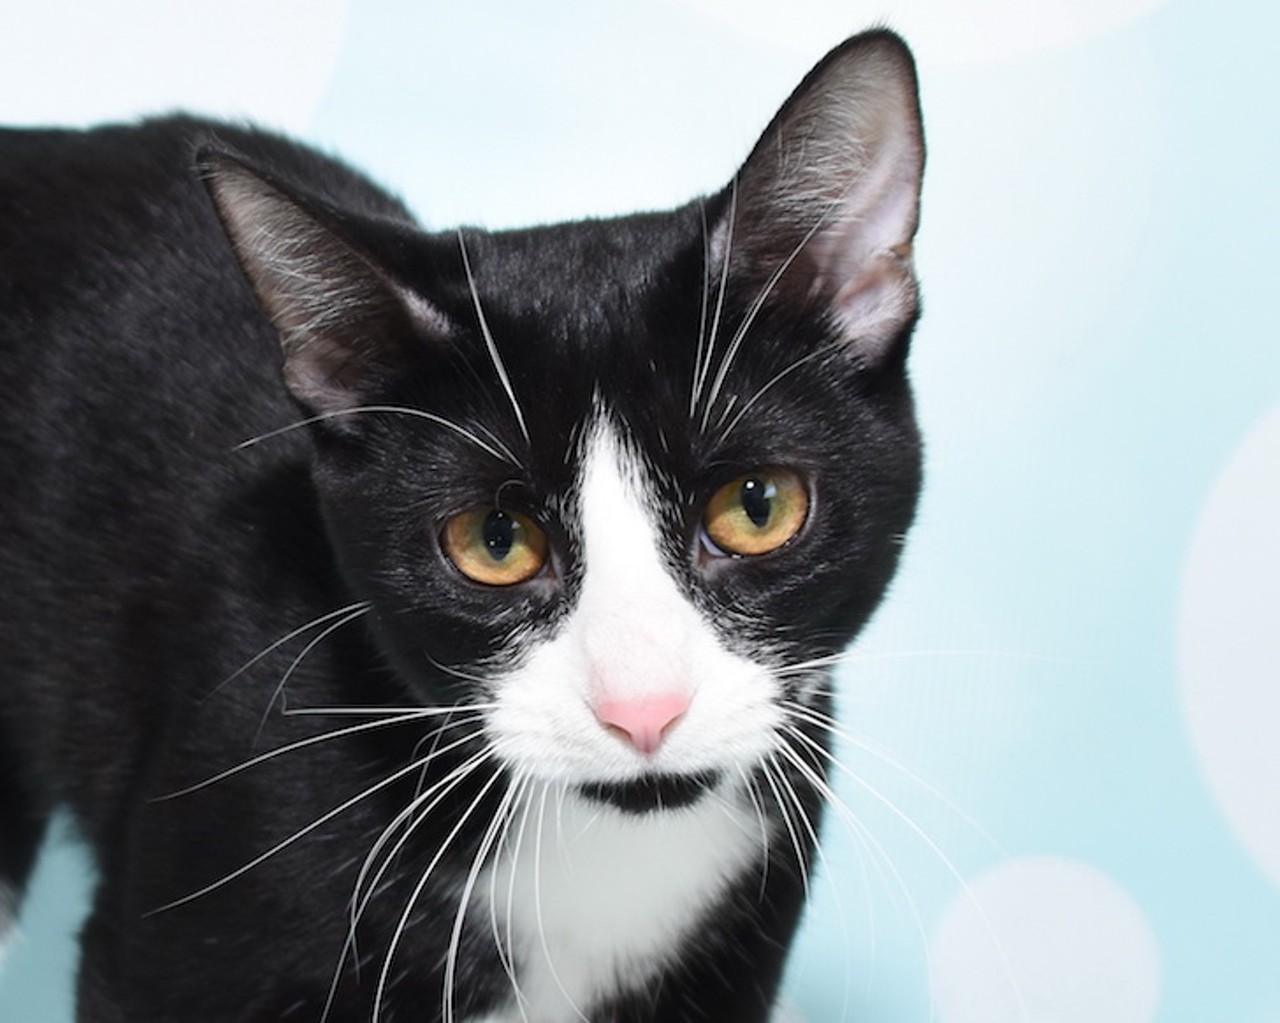 13 adoptable cats available right now at Orange County Animal Services